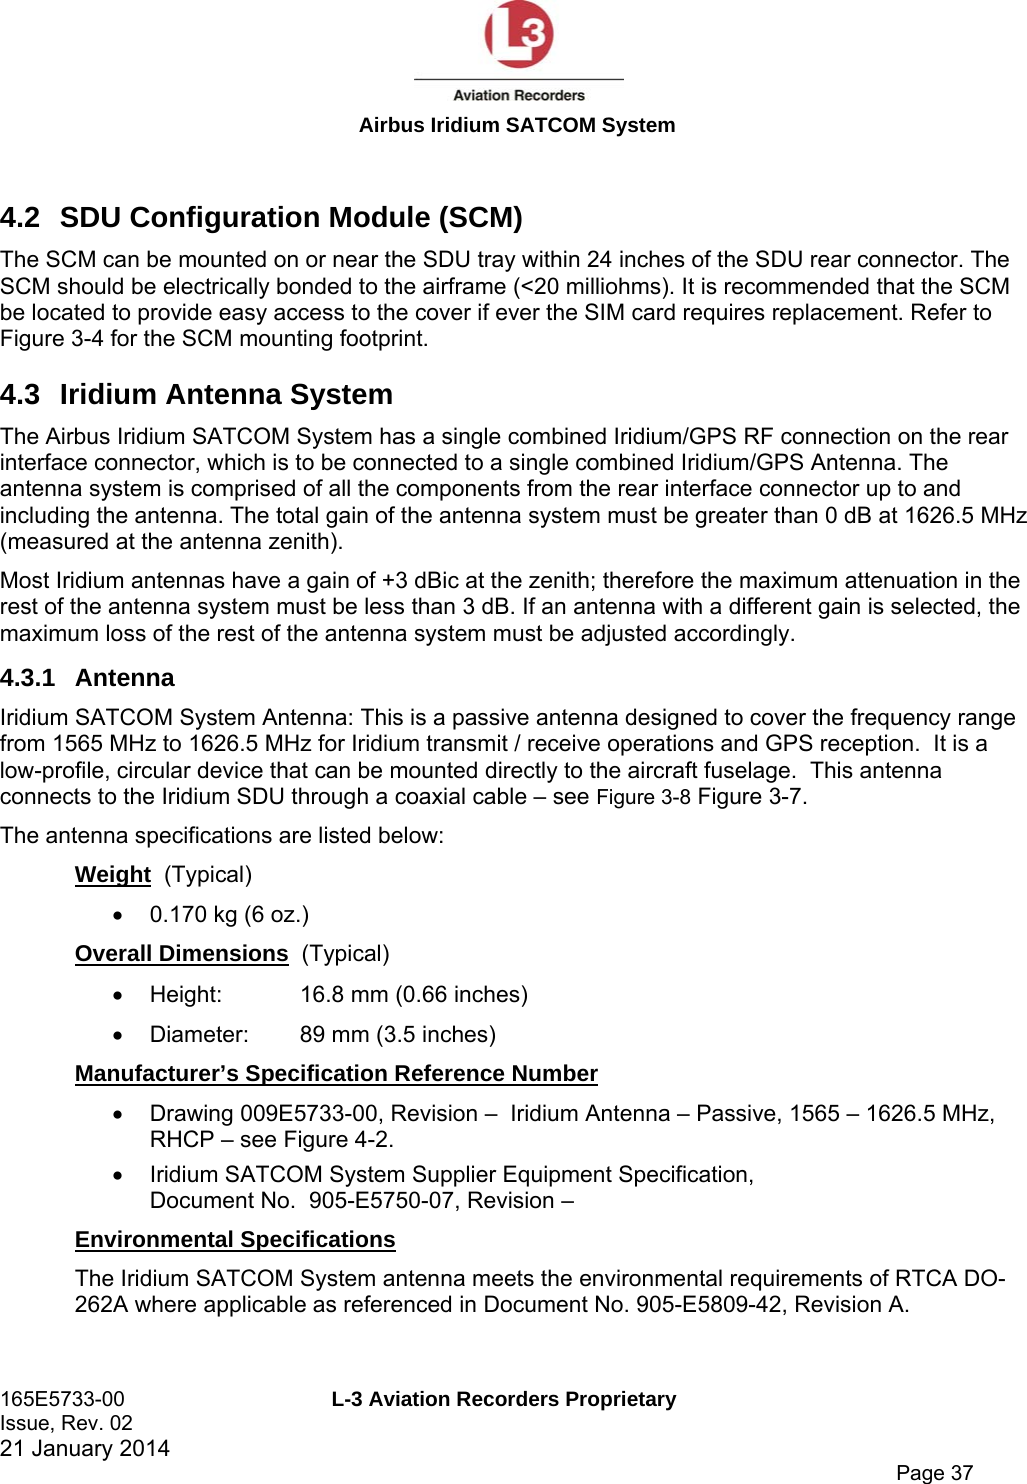  Airbus Iridium SATCOM System 165E5733-00  L-3 Aviation Recorders Proprietary Issue, Rev. 02   21 January 2014      Page 37  4.2  SDU Configuration Module (SCM) The SCM can be mounted on or near the SDU tray within 24 inches of the SDU rear connector. The SCM should be electrically bonded to the airframe (&lt;20 milliohms). It is recommended that the SCM be located to provide easy access to the cover if ever the SIM card requires replacement. Refer to Figure 3-4 for the SCM mounting footprint. 4.3  Iridium Antenna System The Airbus Iridium SATCOM System has a single combined Iridium/GPS RF connection on the rear interface connector, which is to be connected to a single combined Iridium/GPS Antenna. The antenna system is comprised of all the components from the rear interface connector up to and including the antenna. The total gain of the antenna system must be greater than 0 dB at 1626.5 MHz (measured at the antenna zenith). Most Iridium antennas have a gain of +3 dBic at the zenith; therefore the maximum attenuation in the rest of the antenna system must be less than 3 dB. If an antenna with a different gain is selected, the maximum loss of the rest of the antenna system must be adjusted accordingly. 4.3.1 Antenna Iridium SATCOM System Antenna: This is a passive antenna designed to cover the frequency range from 1565 MHz to 1626.5 MHz for Iridium transmit / receive operations and GPS reception.  It is a low-profile, circular device that can be mounted directly to the aircraft fuselage.  This antenna connects to the Iridium SDU through a coaxial cable – see Figure 3-8 Figure 3-7. The antenna specifications are listed below: Weight  (Typical)   0.170 kg (6 oz.) Overall Dimensions  (Typical)   Height:   16.8 mm (0.66 inches)   Diameter:  89 mm (3.5 inches) Manufacturer’s Specification Reference Number   Drawing 009E5733-00, Revision –  Iridium Antenna – Passive, 1565 – 1626.5 MHz, RHCP – see Figure 4-2.   Iridium SATCOM System Supplier Equipment Specification,  Document No.  905-E5750-07, Revision –  Environmental Specifications The Iridium SATCOM System antenna meets the environmental requirements of RTCA DO-262A where applicable as referenced in Document No. 905-E5809-42, Revision A.  